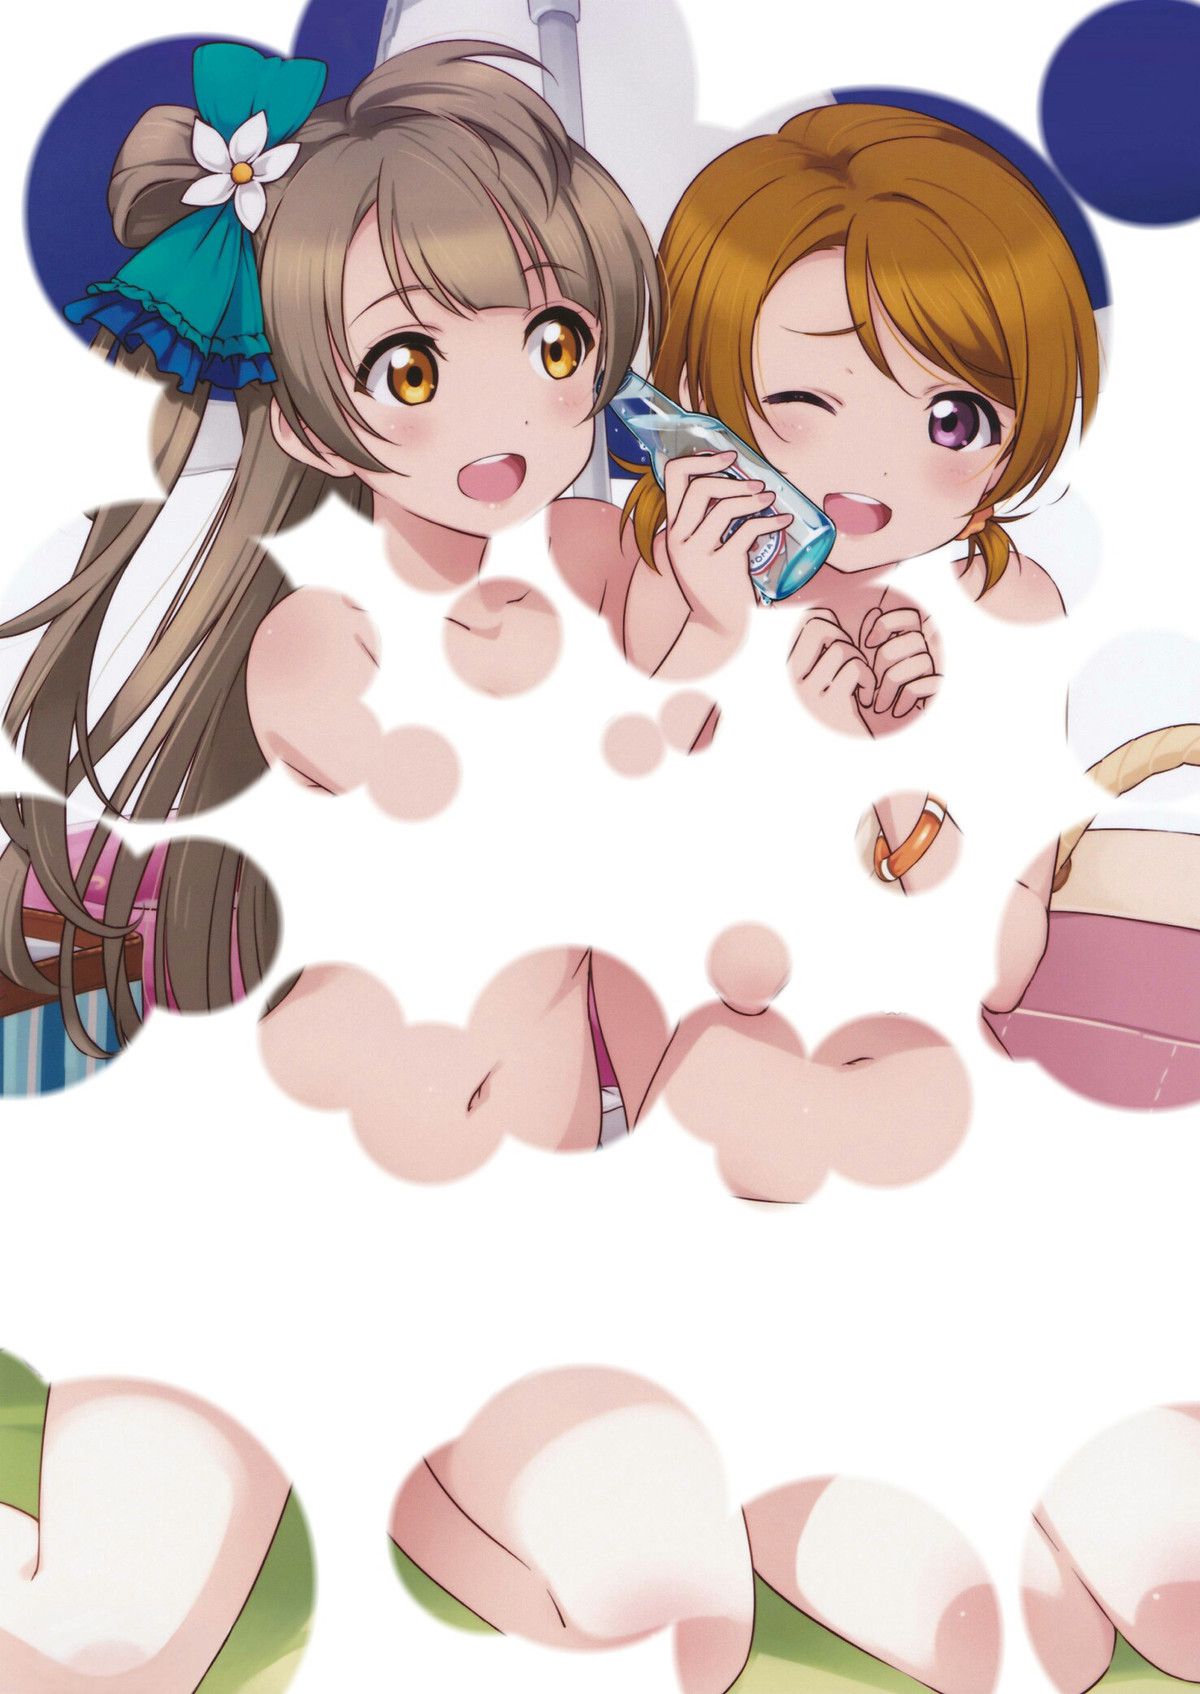 "Love live! "Look happy dots Photoshop images too obscene Yavapai or www 7